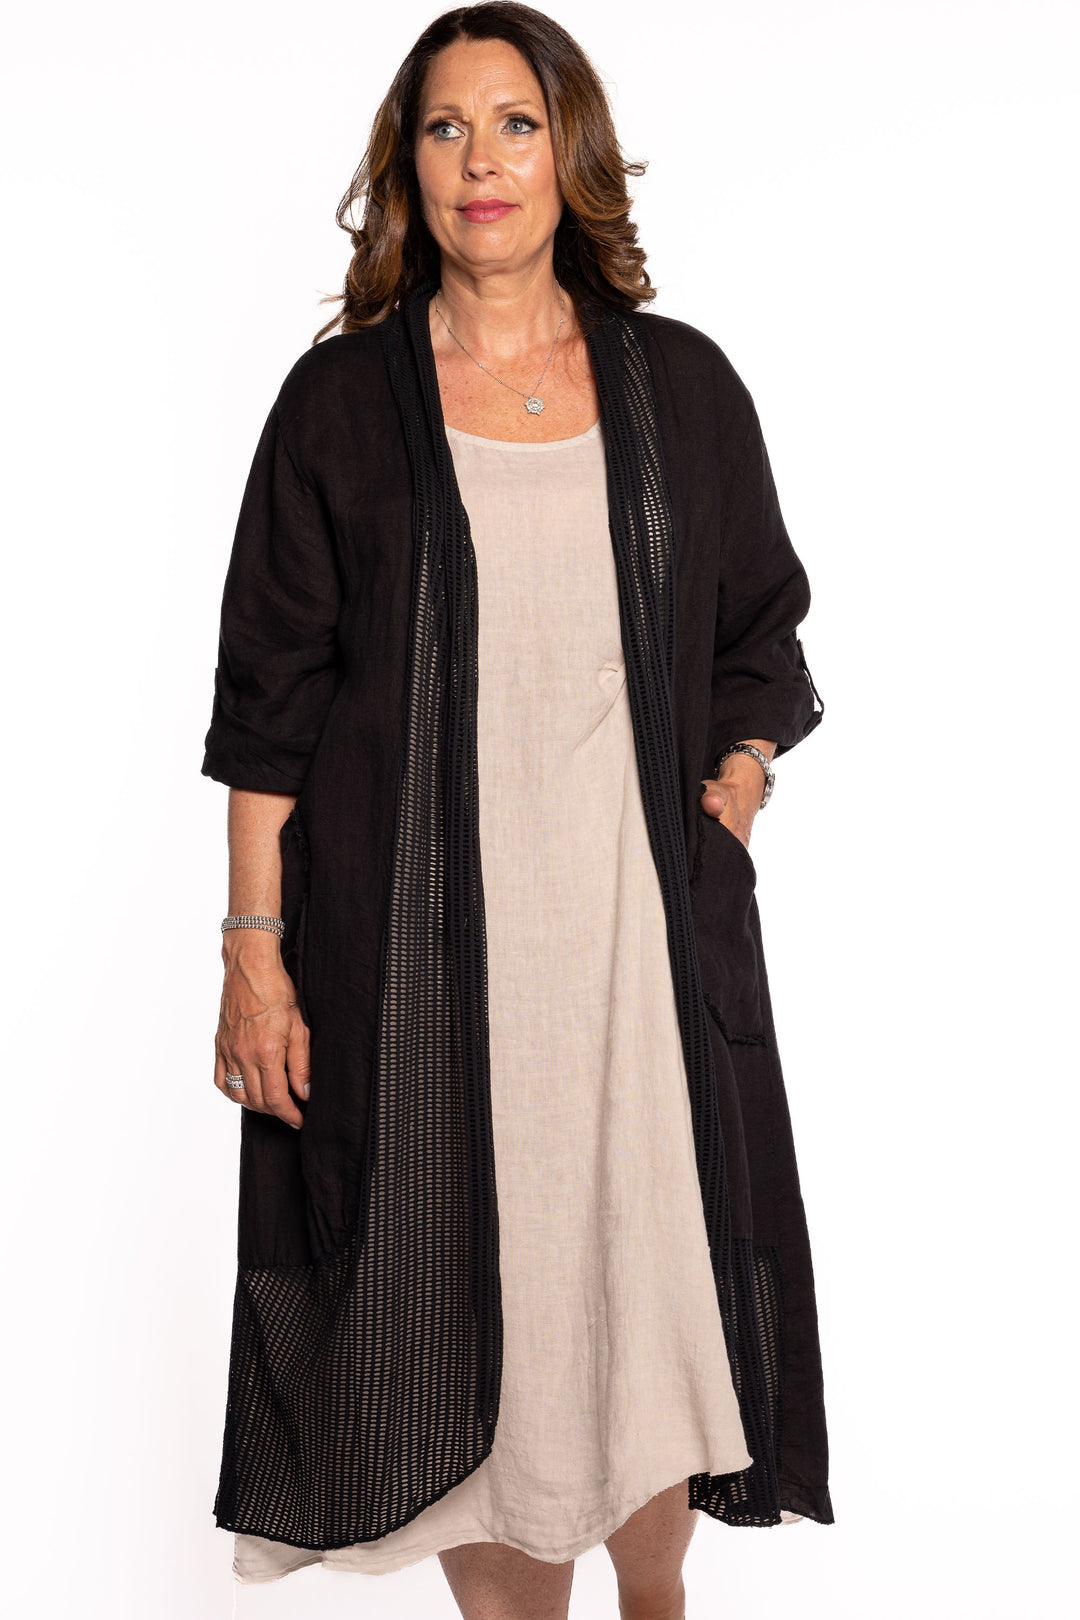 Etern Spring 2023 women's casual oversized loose open front linen cardigan with pockets - black